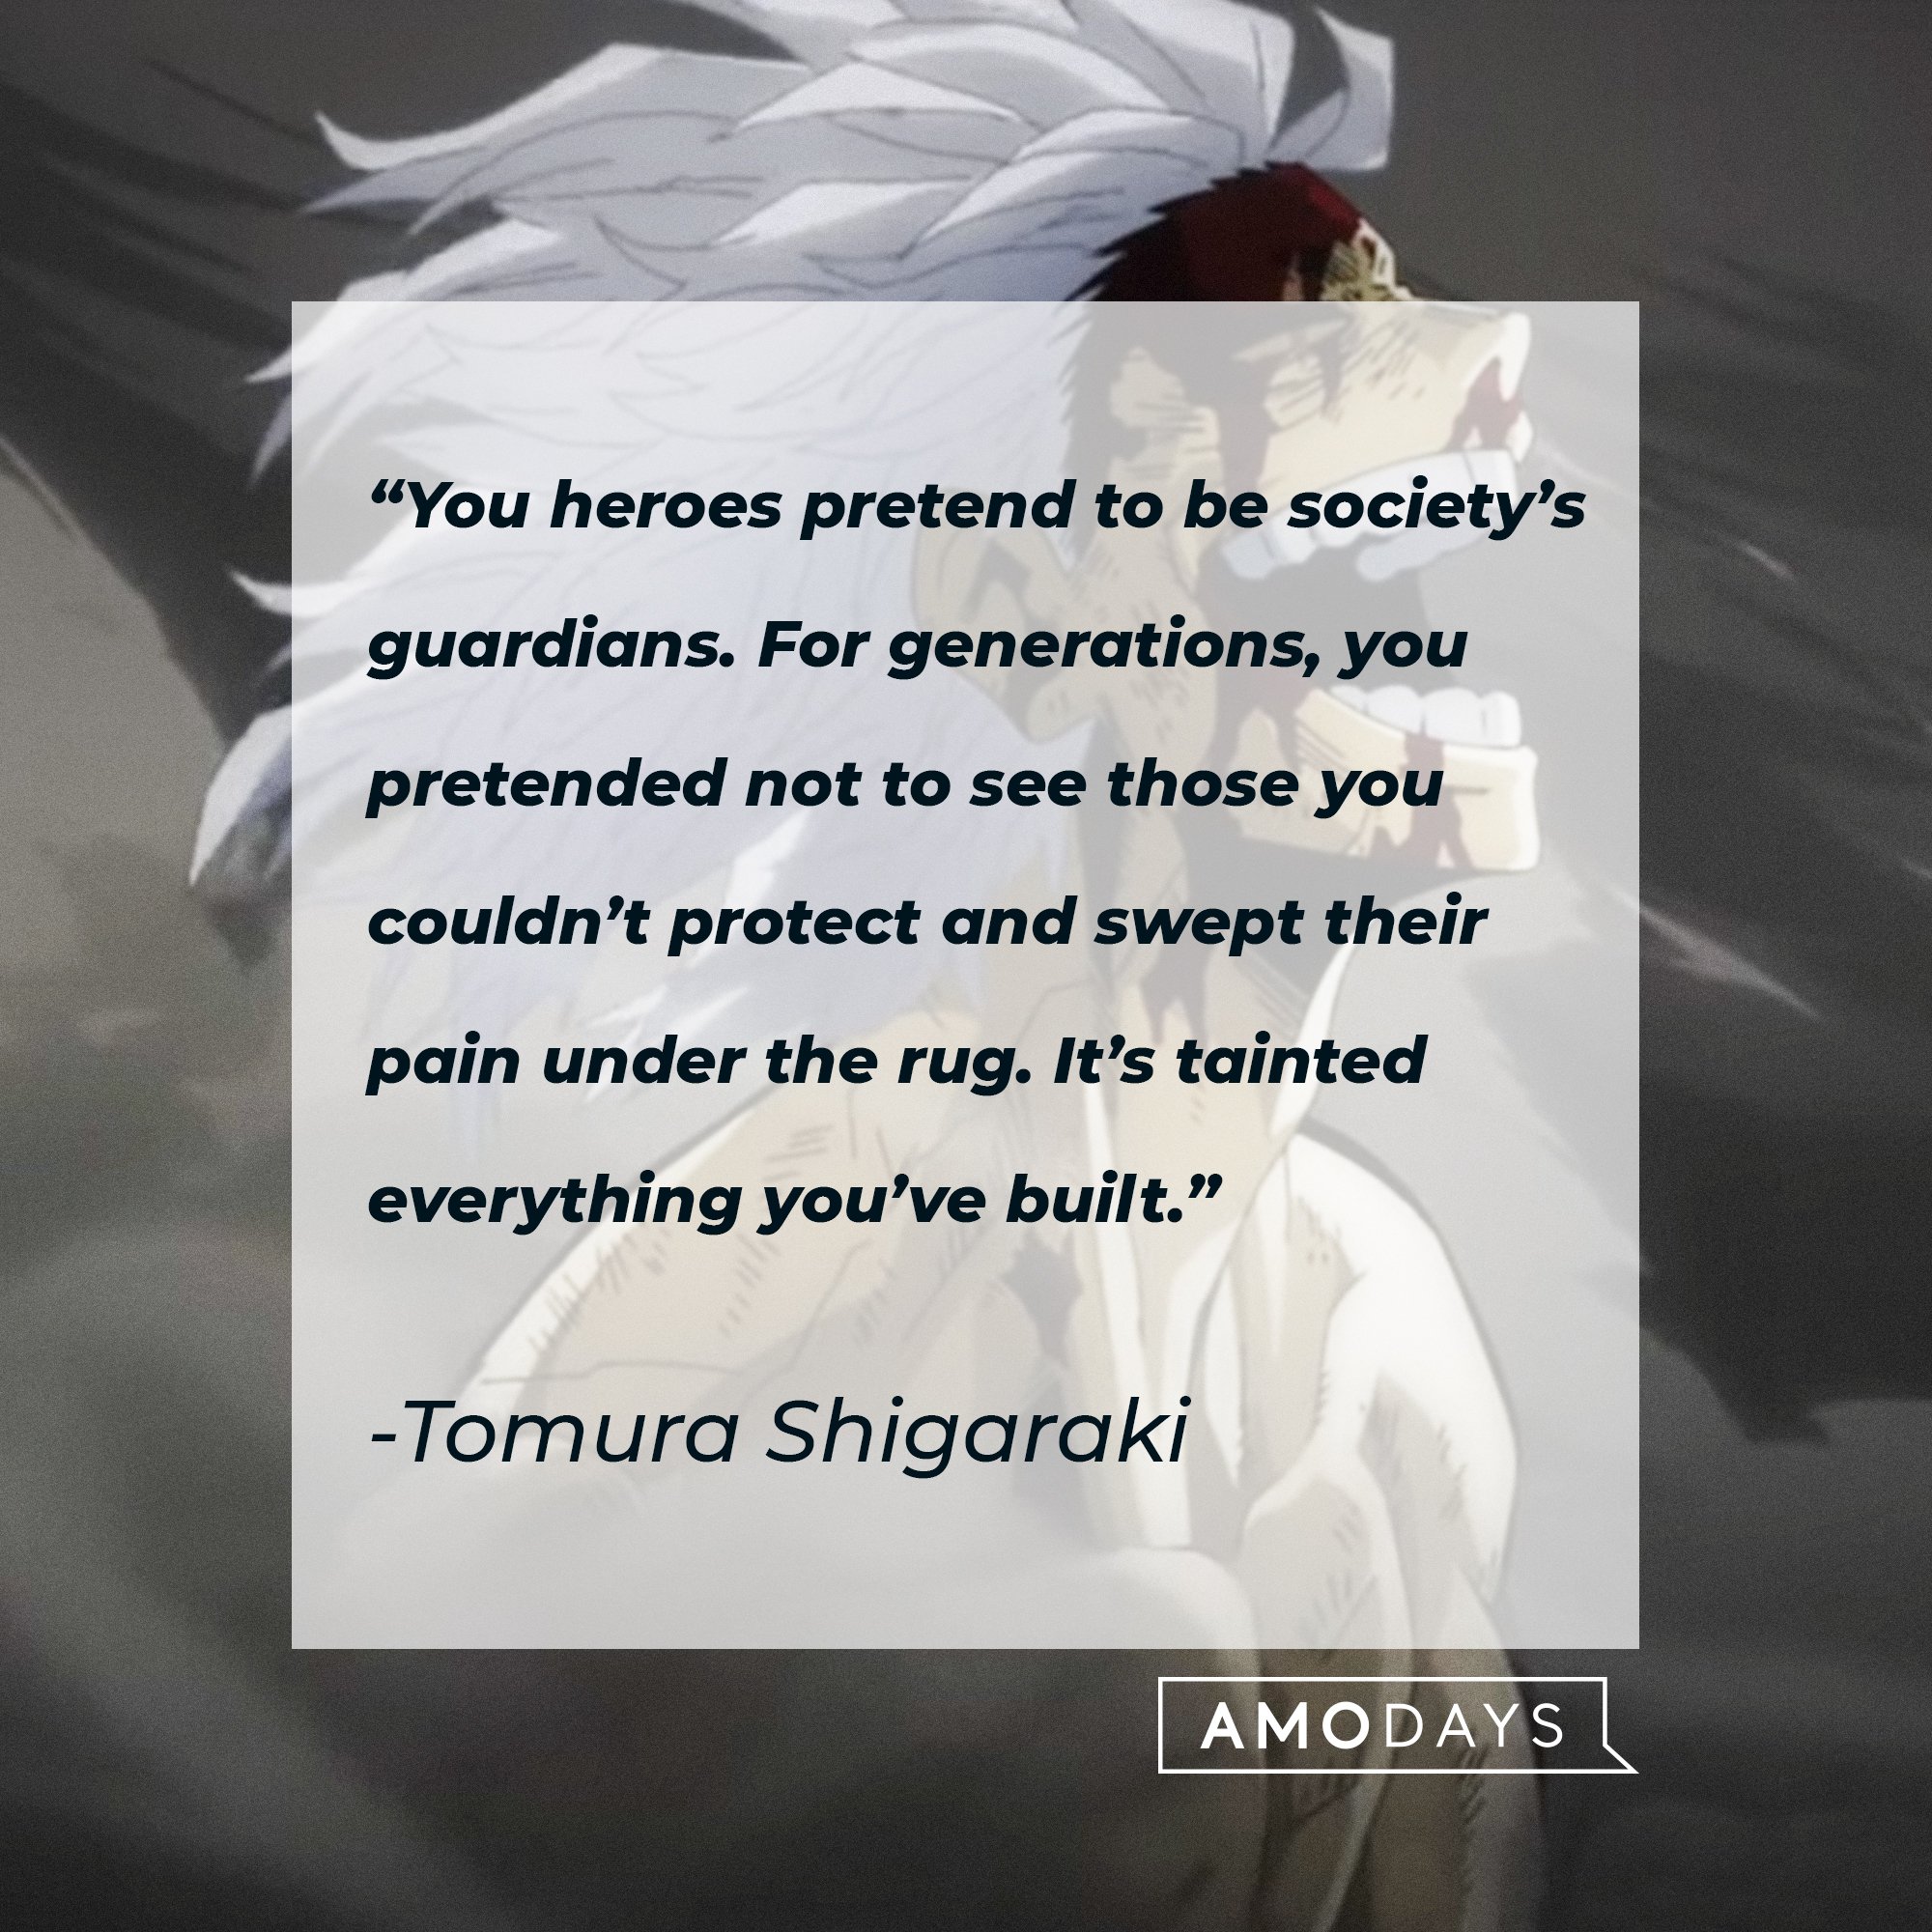 Tomura Shigaraki’s quote: "You heroes pretend to be society’s guardians. For generations, you pretended not to see those you couldn’t protect and swept their pain under the rug. It’s tainted everything you’ve built.” | Image: AmoDays